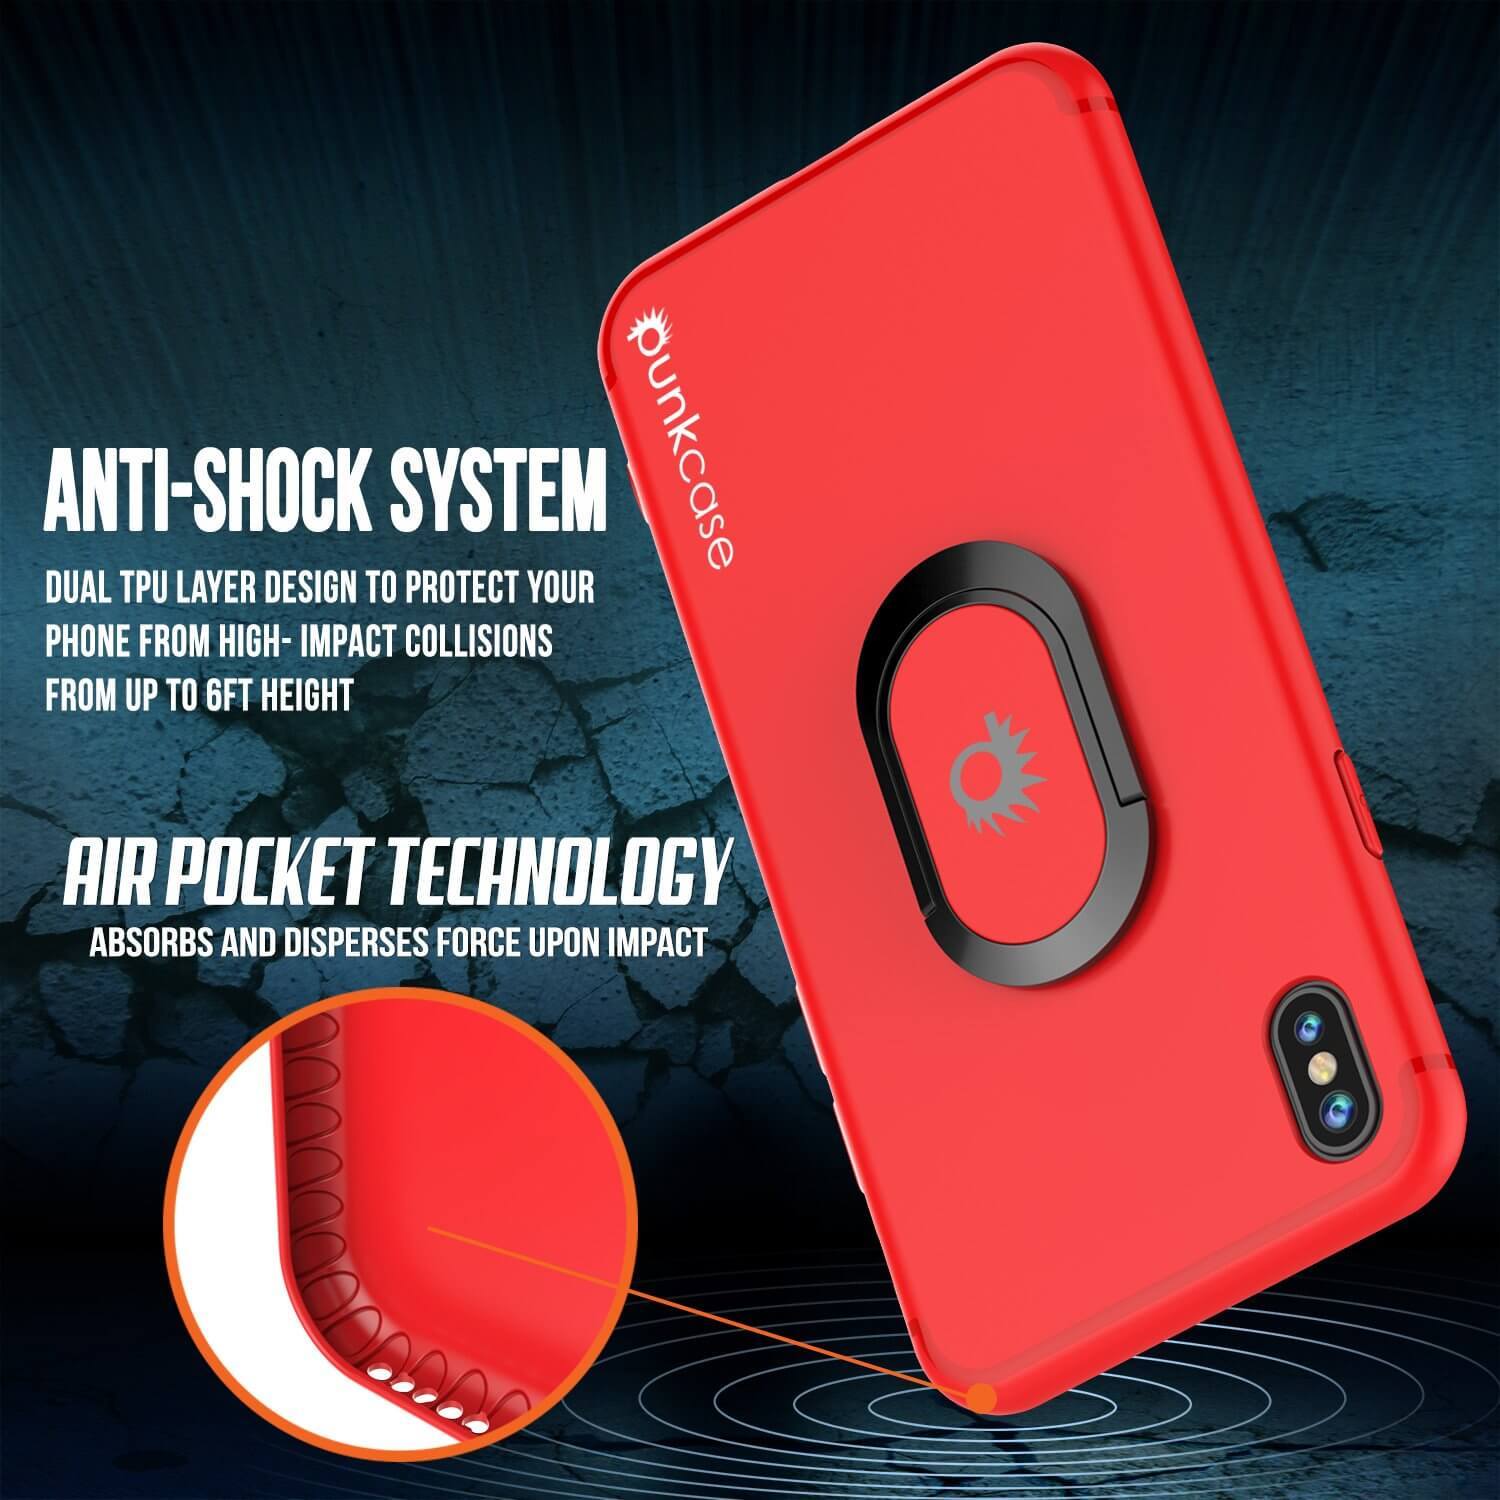 iPhone XS Max Case, Punkcase Magnetix Protective TPU Cover W/ Kickstand, Tempered Glass Screen Protector [Red] - PunkCase NZ